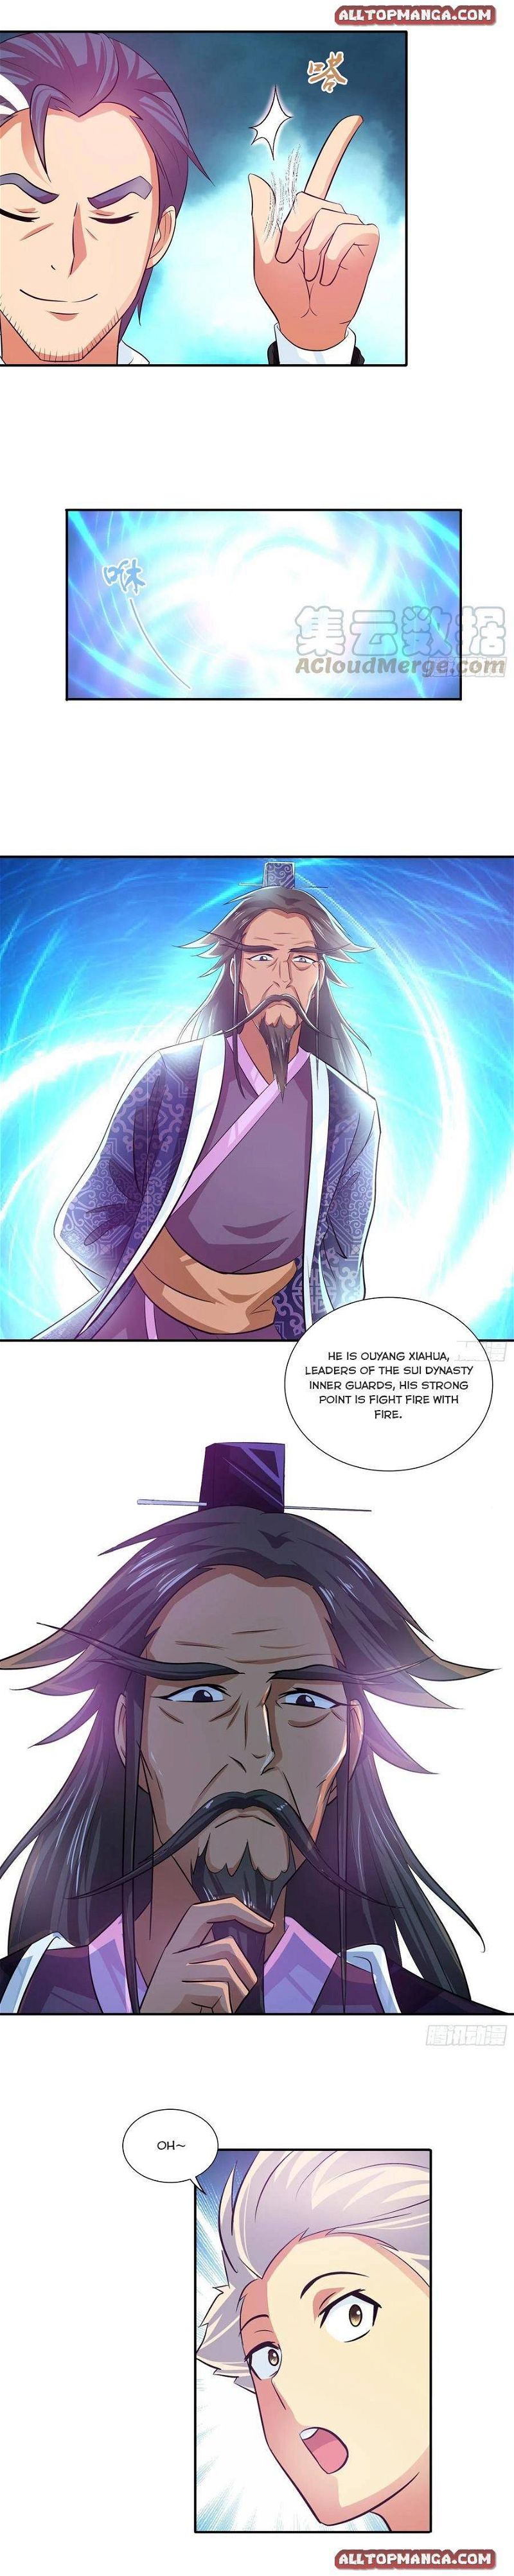 I Am A God Of Medicine Chapter 81 page 1